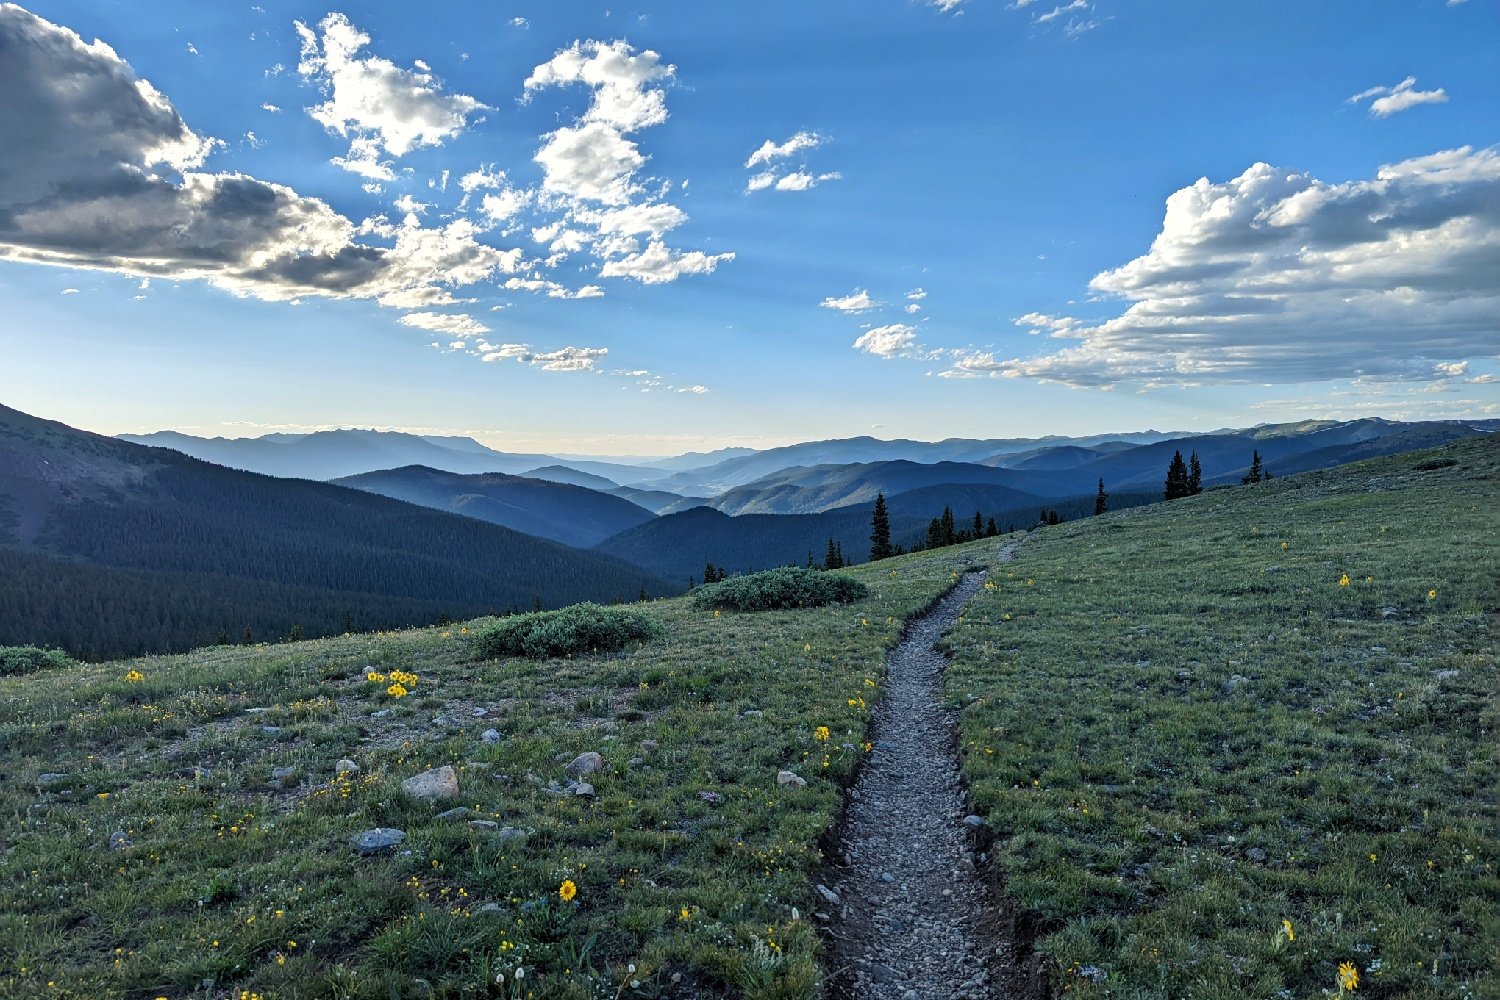 A trail cutting through an alpine meadow with layers of mountains in the distance